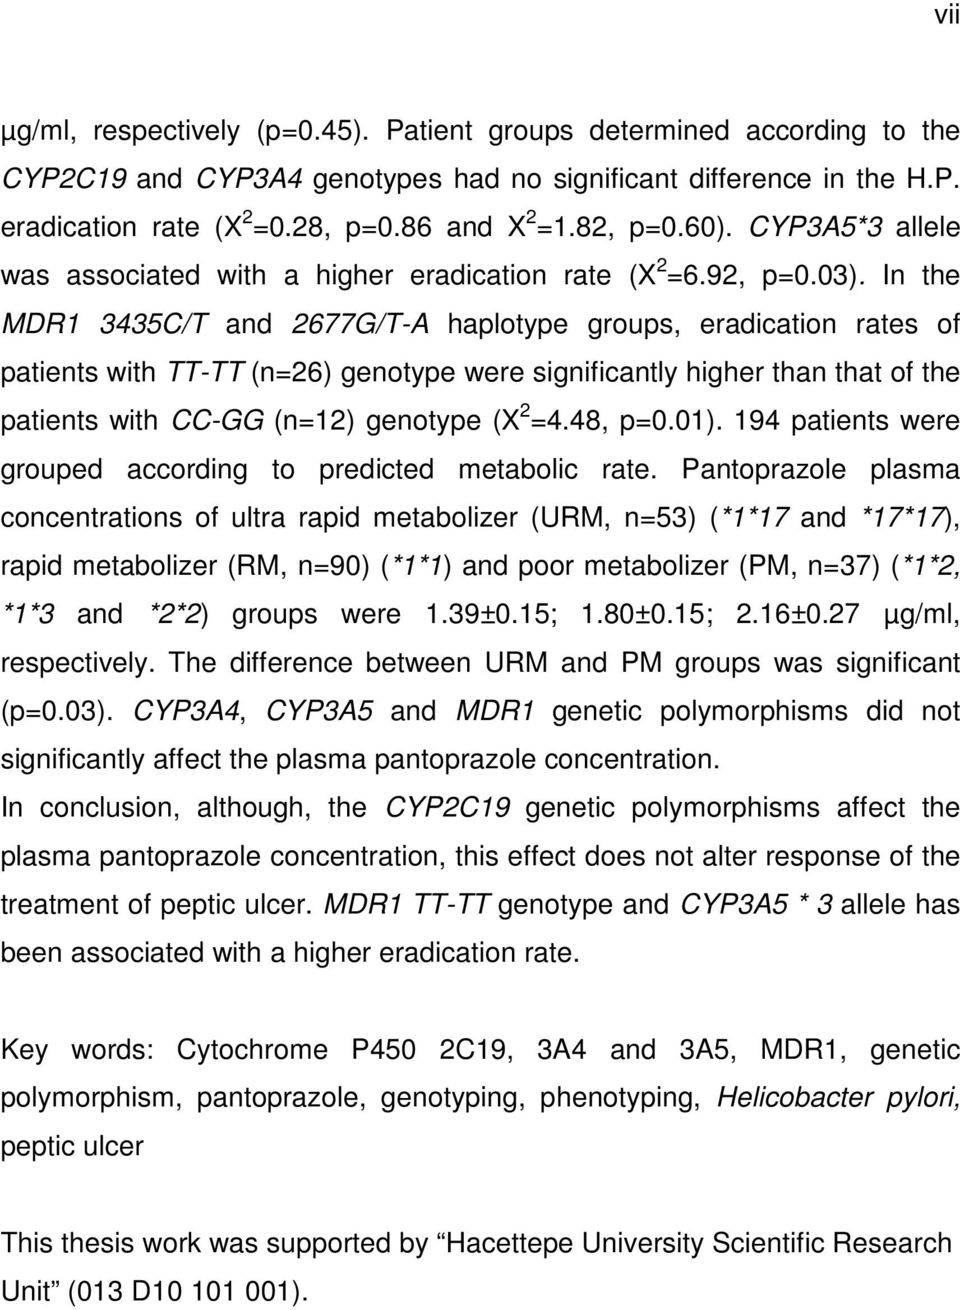 In the MDR1 3435C/T and 2677G/T-A haplotype groups, eradication rates of patients with TT-TT (n=26) genotype were significantly higher than that of the patients with CC-GG (n=12) genotype (X 2 =4.